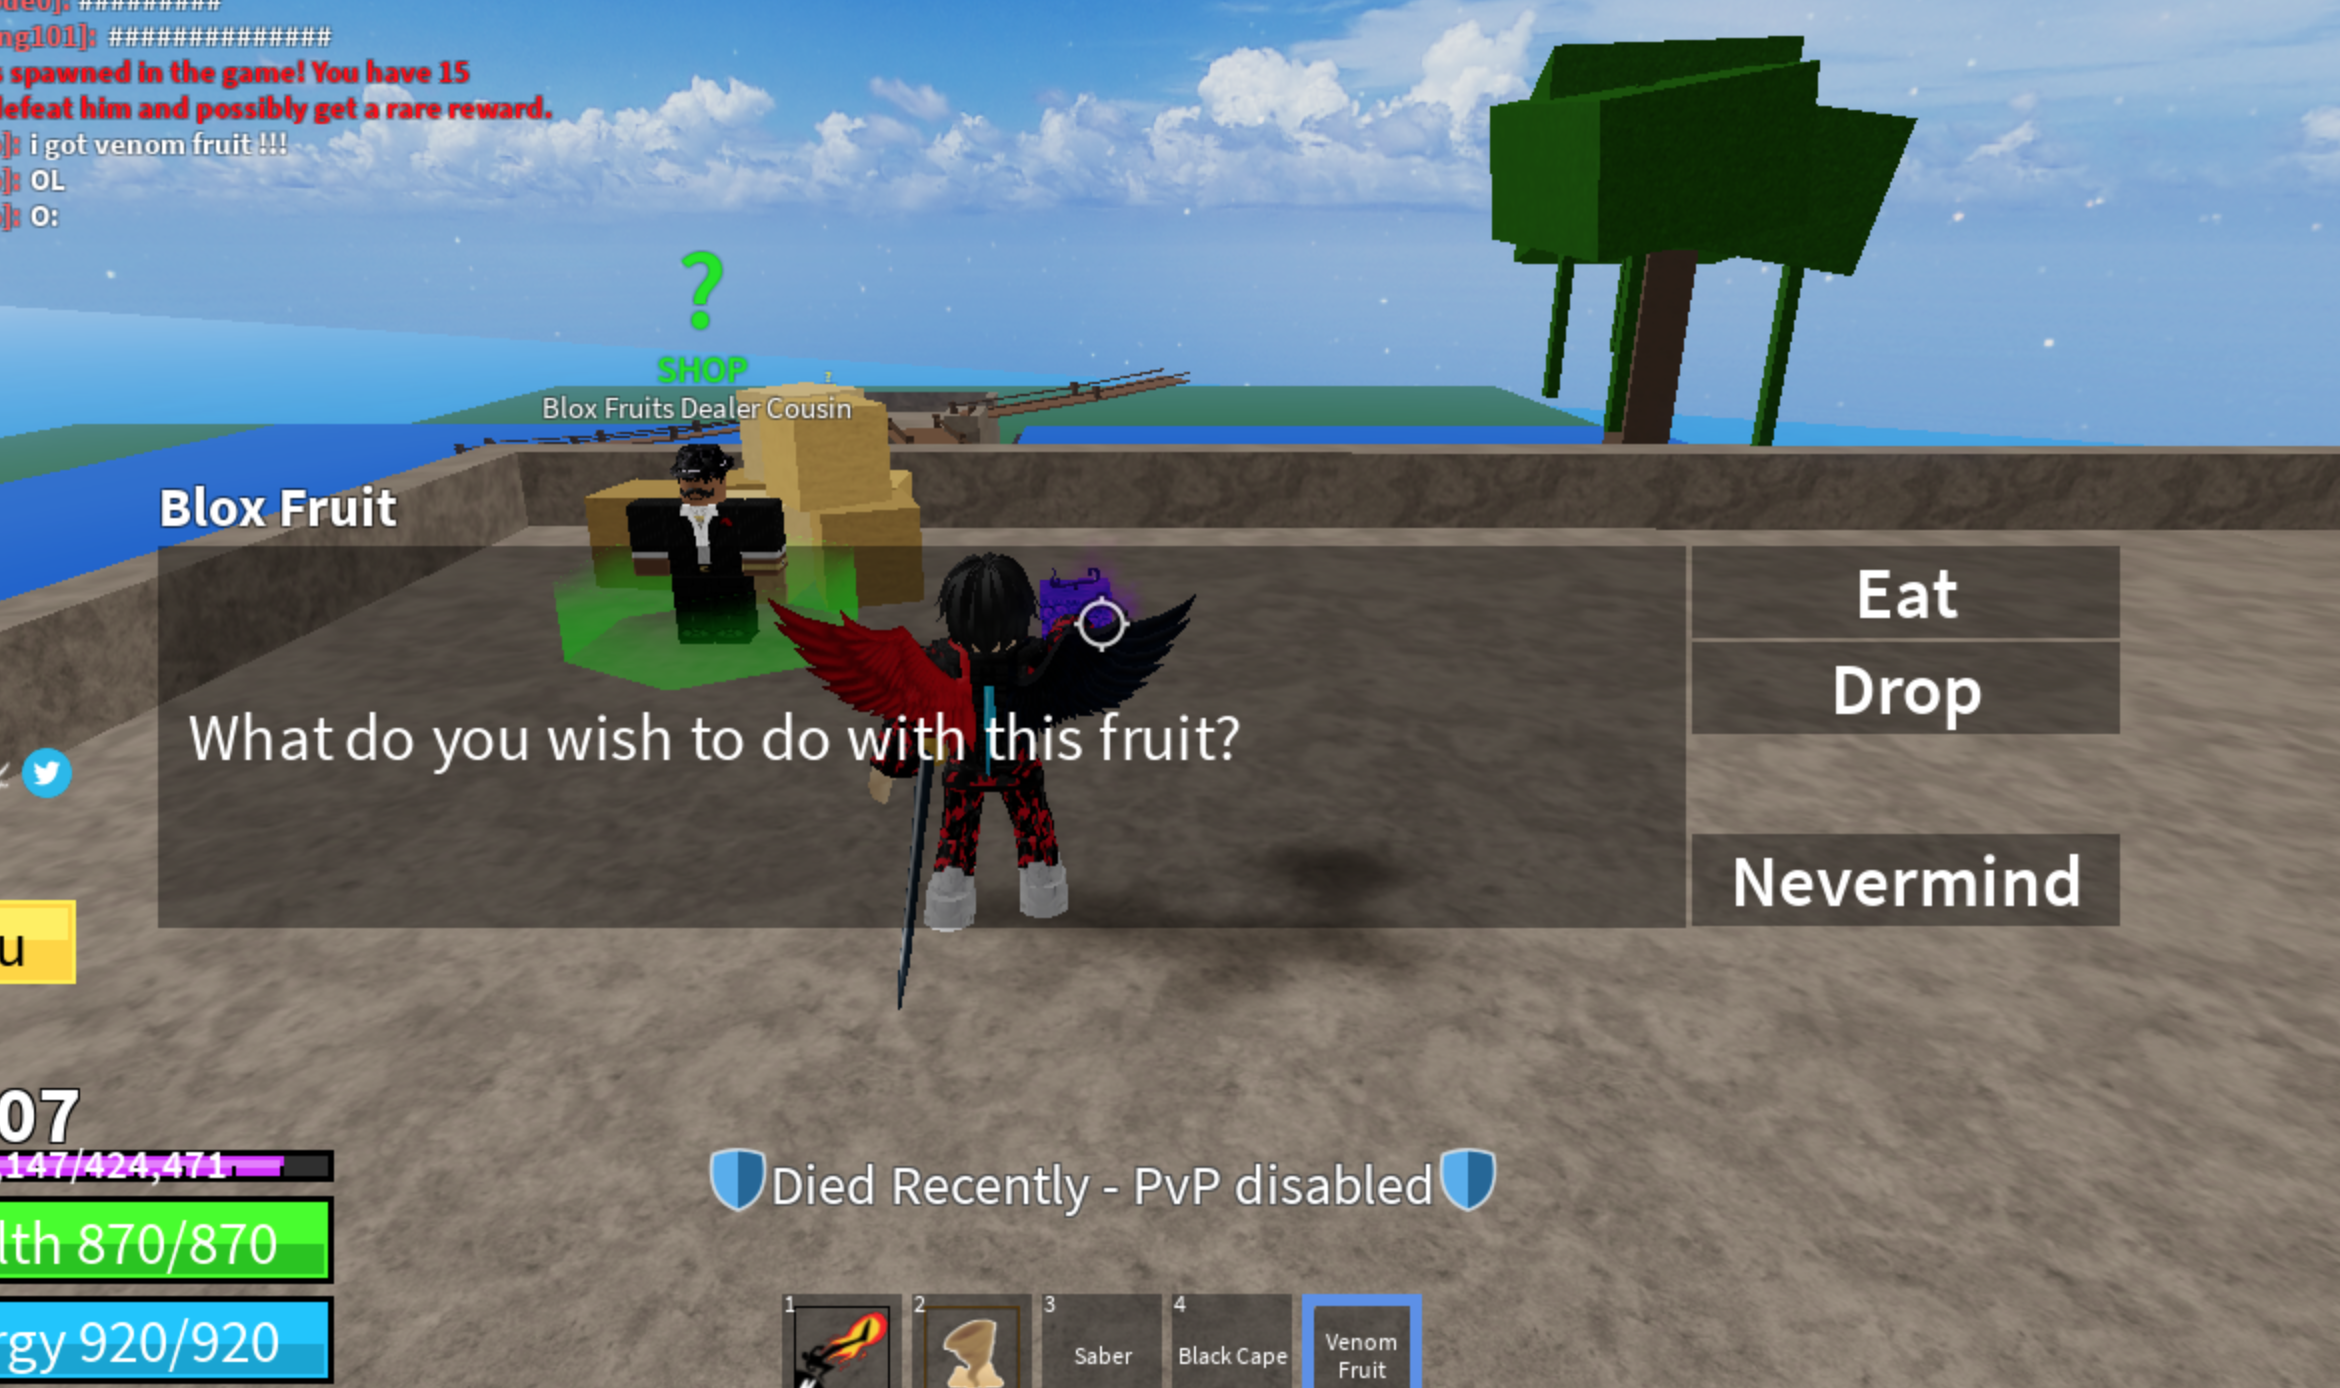 What is your best spin? : r/bloxfruits